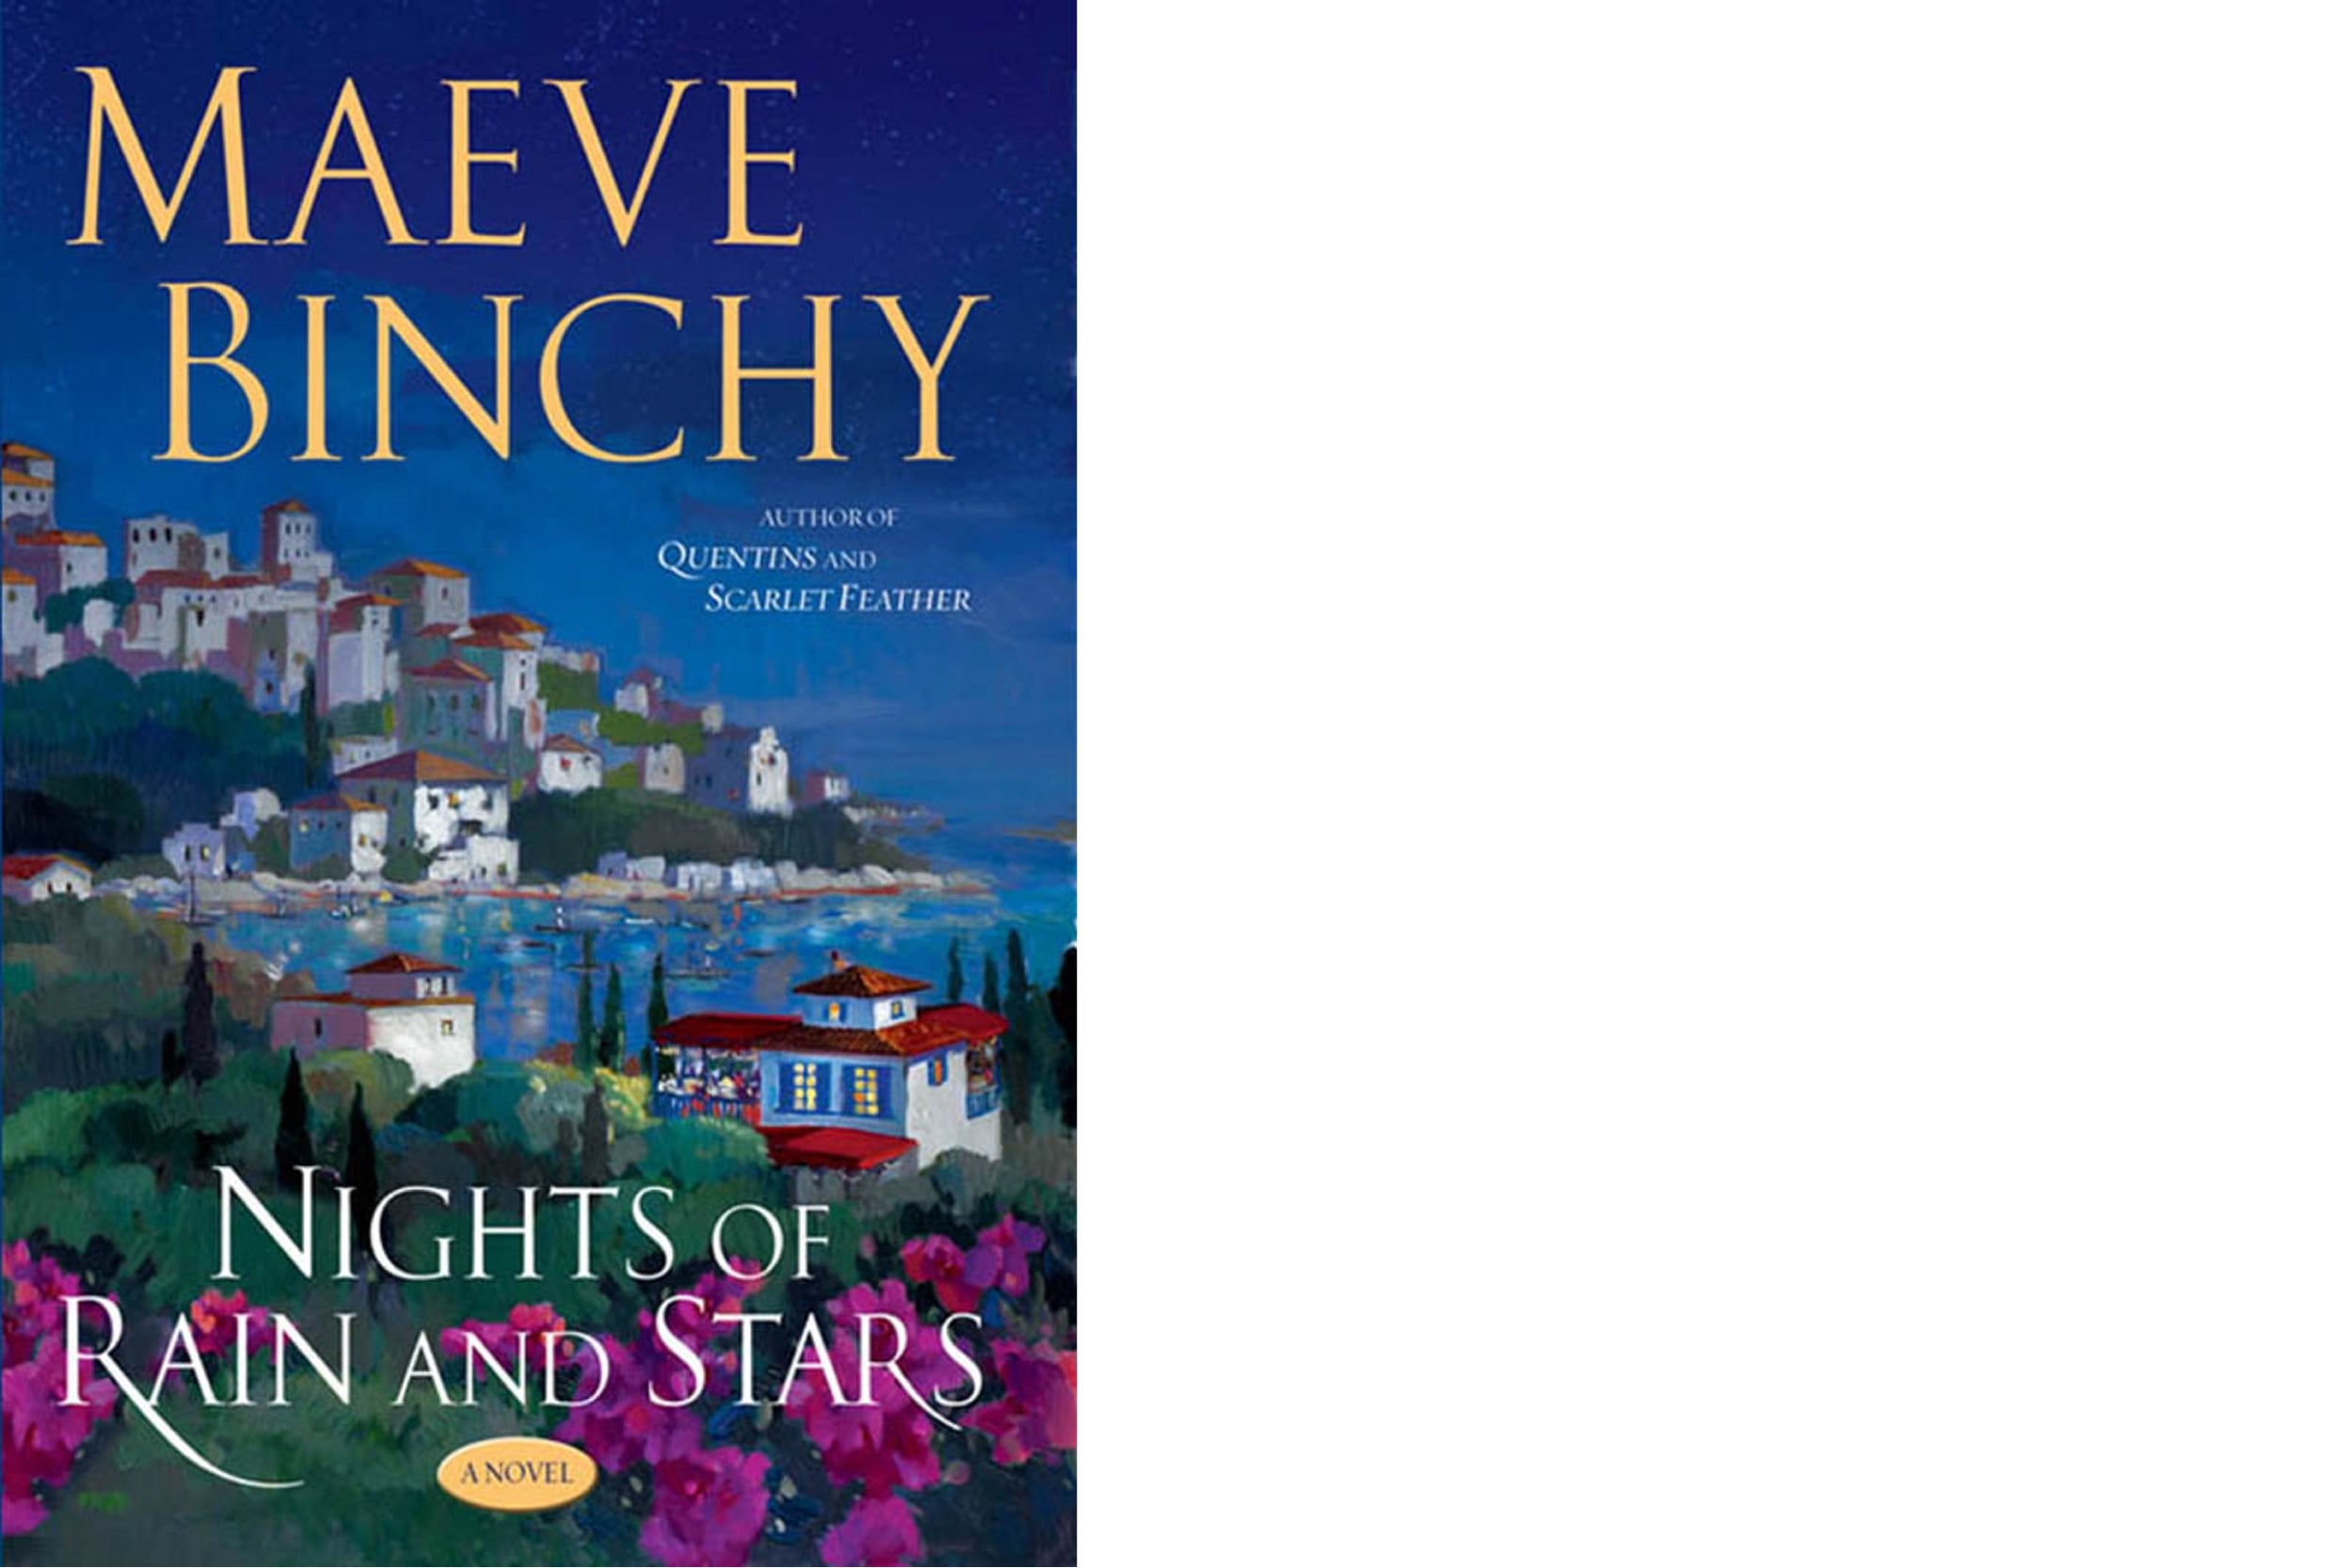 Book cover: “Nights of Rain and Stars” by Maeve Binchy.